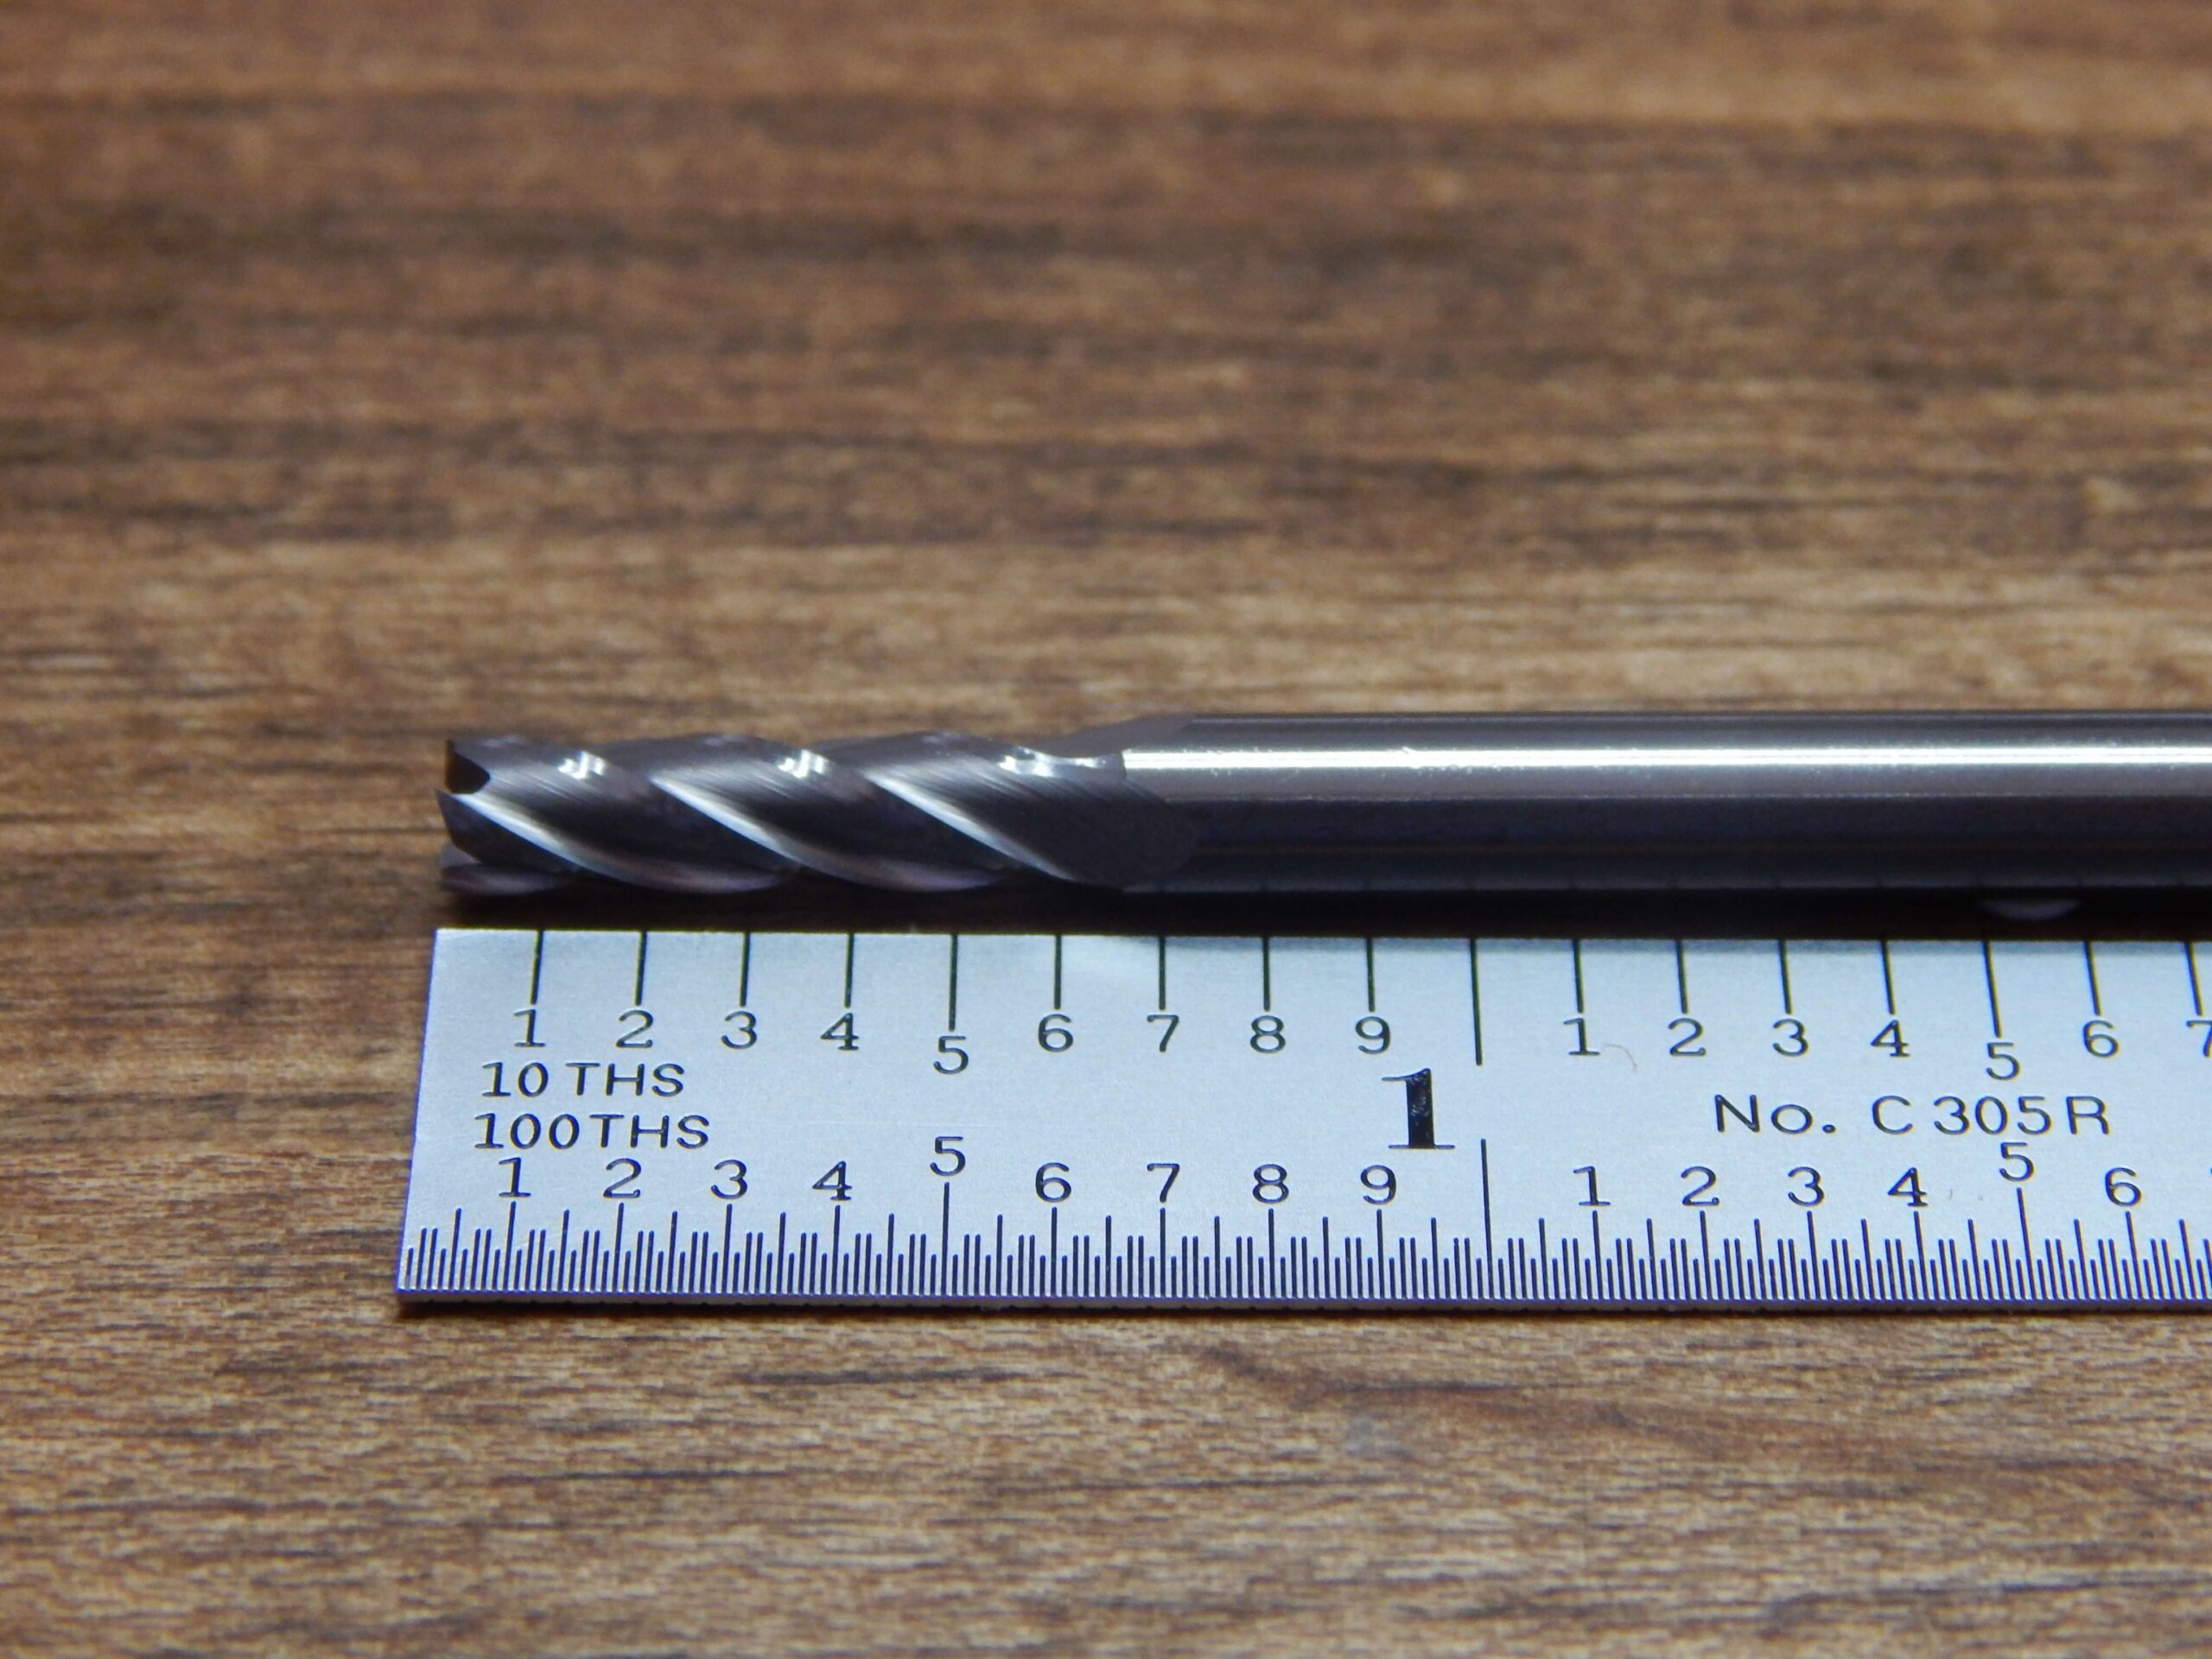 SCS -**BRAND NEW** 001-40-0156-000 .156 5/32 4 FL Carbide End Mill